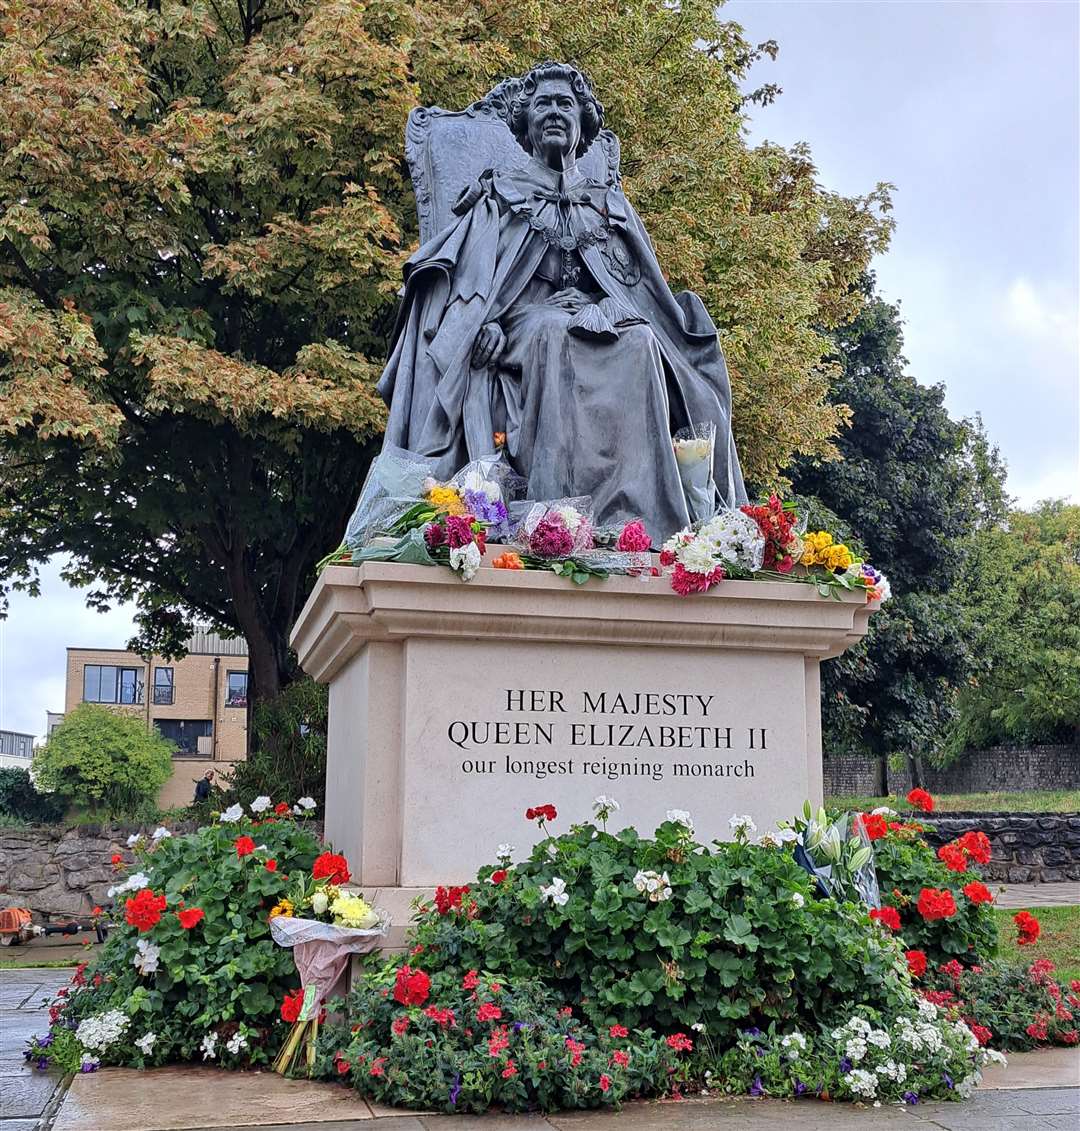 Flowers laid at the Queen Elizabeth statue in Gravesend